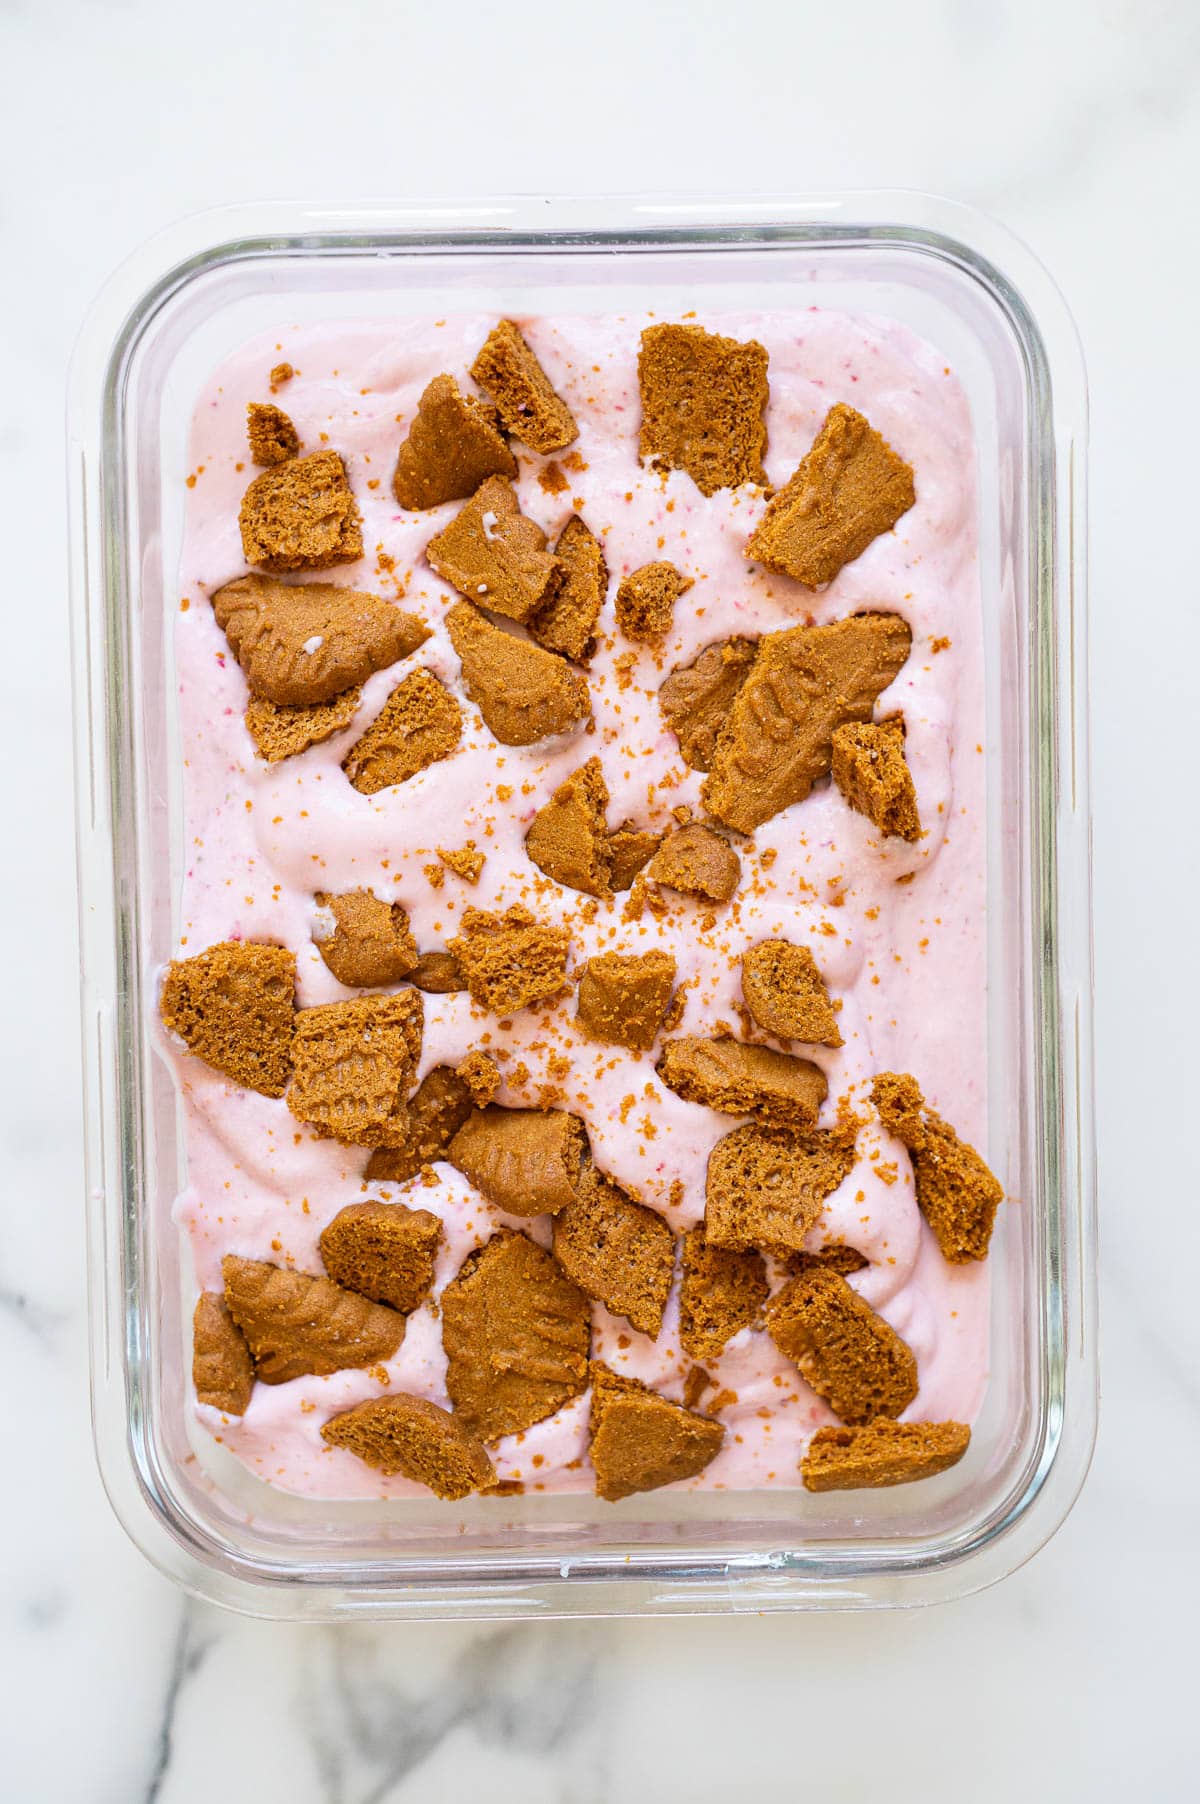 Strawberry cottage cheese ice cream with crushed cookies on top before freezing.